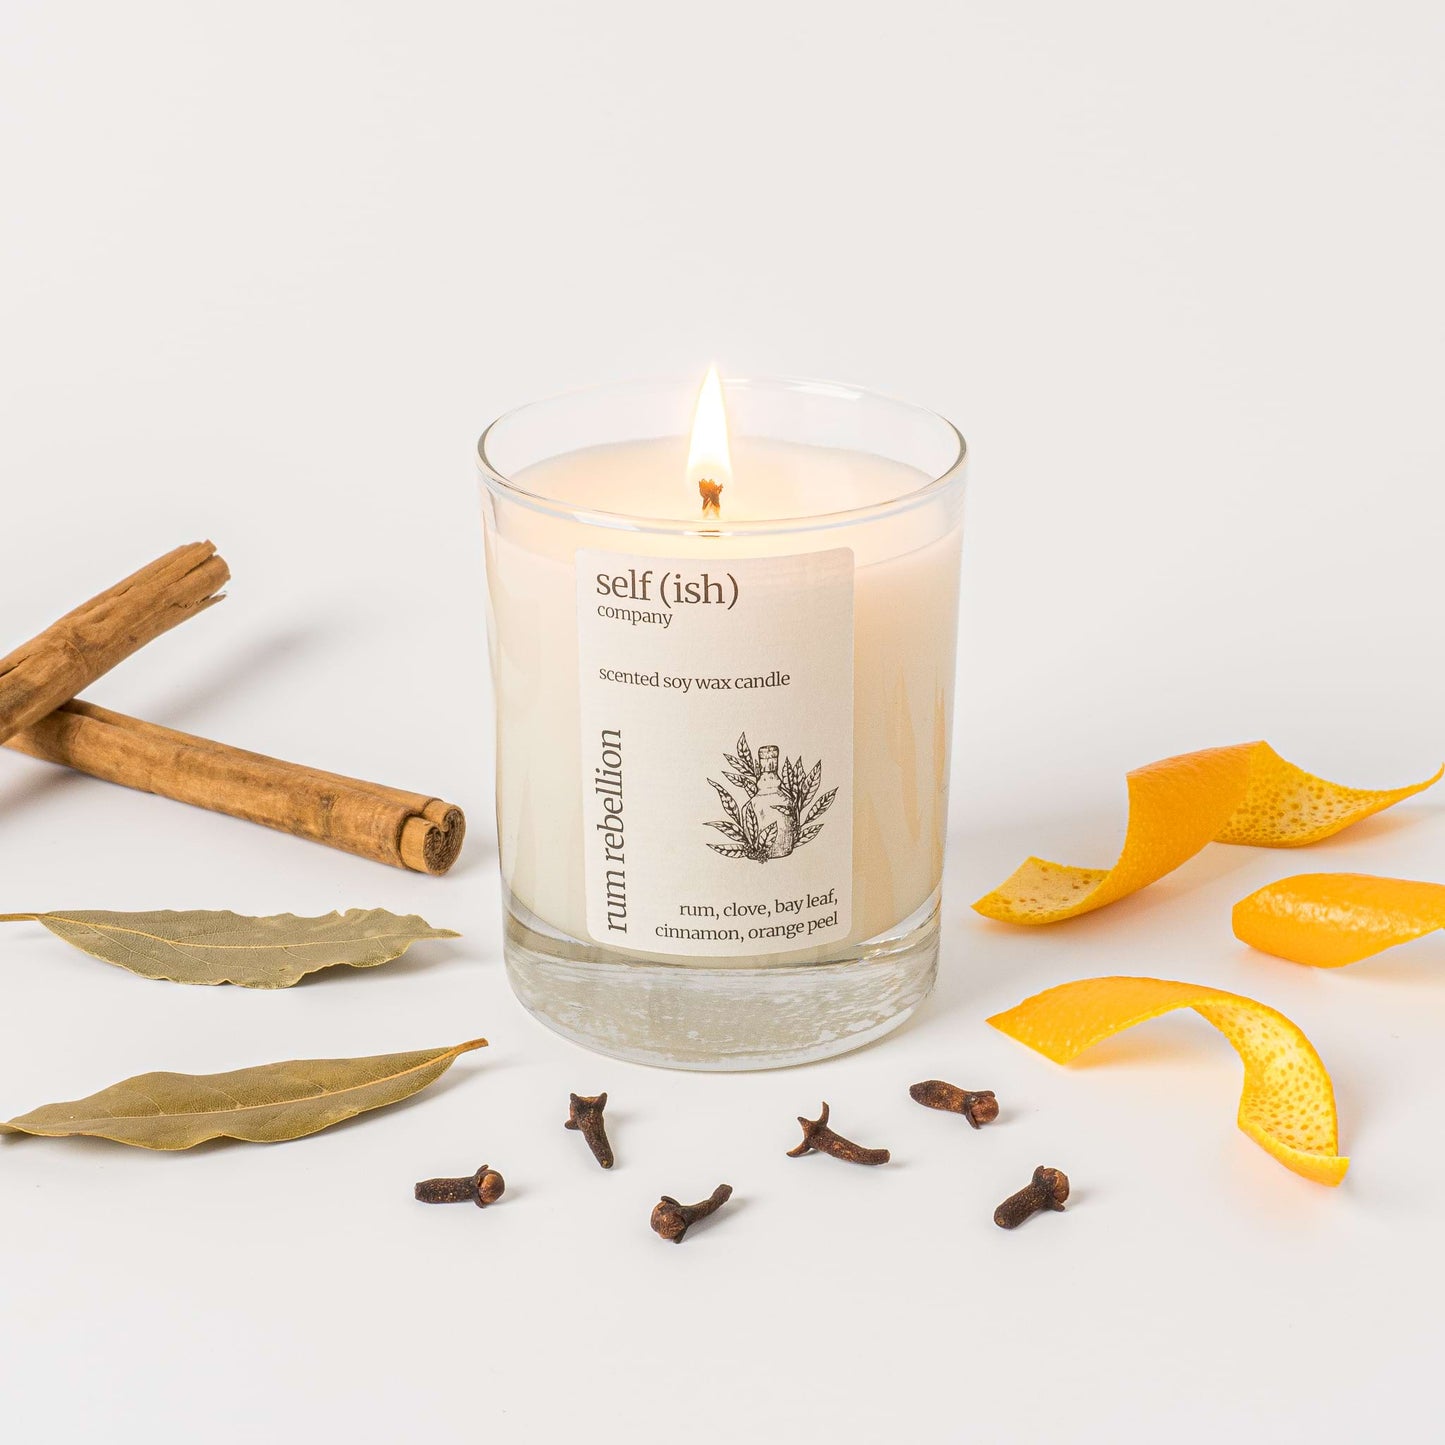 rum scented soy wax candle with a burning single wick and pretty label, eco-friendly candle for sale suitable for vegans, best candle to buy online in the UK, handcrafted candle